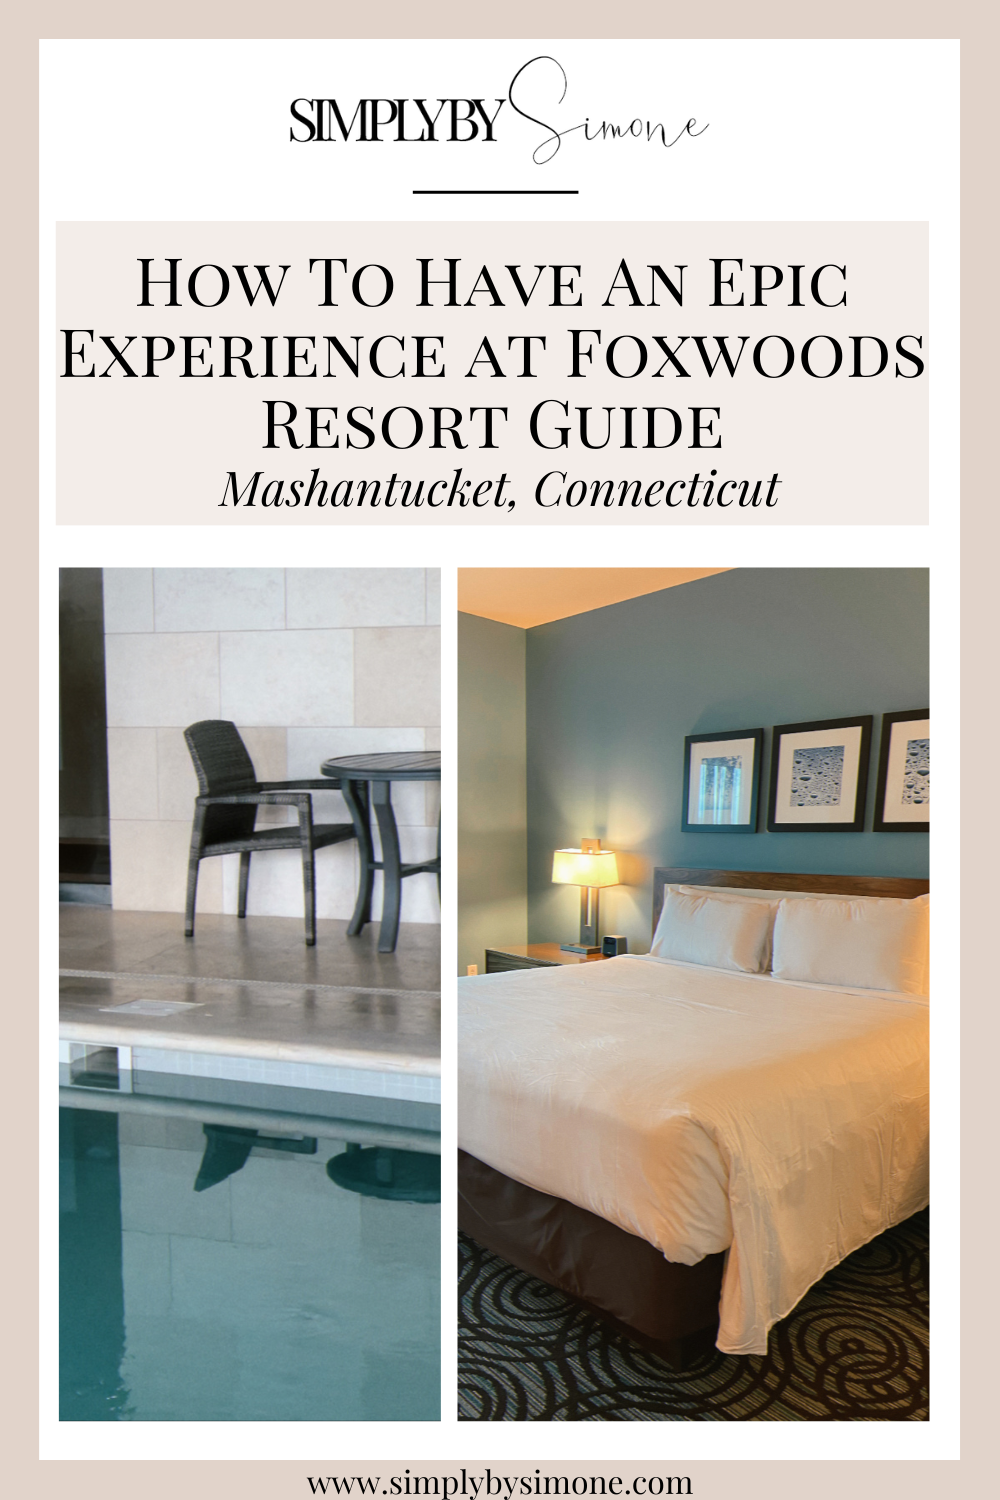 How To Have An Epic Experience at Foxwoods Resort Guide | Girls Trip To Foxwoods Resort || 48 Hours at Foxwoods | The Perfect Weekend Itinerary | Best Things to Do in Connecticut | Explore Foxwoods Resort Casino | Two Days at Foxwoods Resort | Foxwoods Travel Guide | Top Things to do at Foxwoods Resort | Foxwoods Resort Travel Guide | Feature Image | Simply by Simone